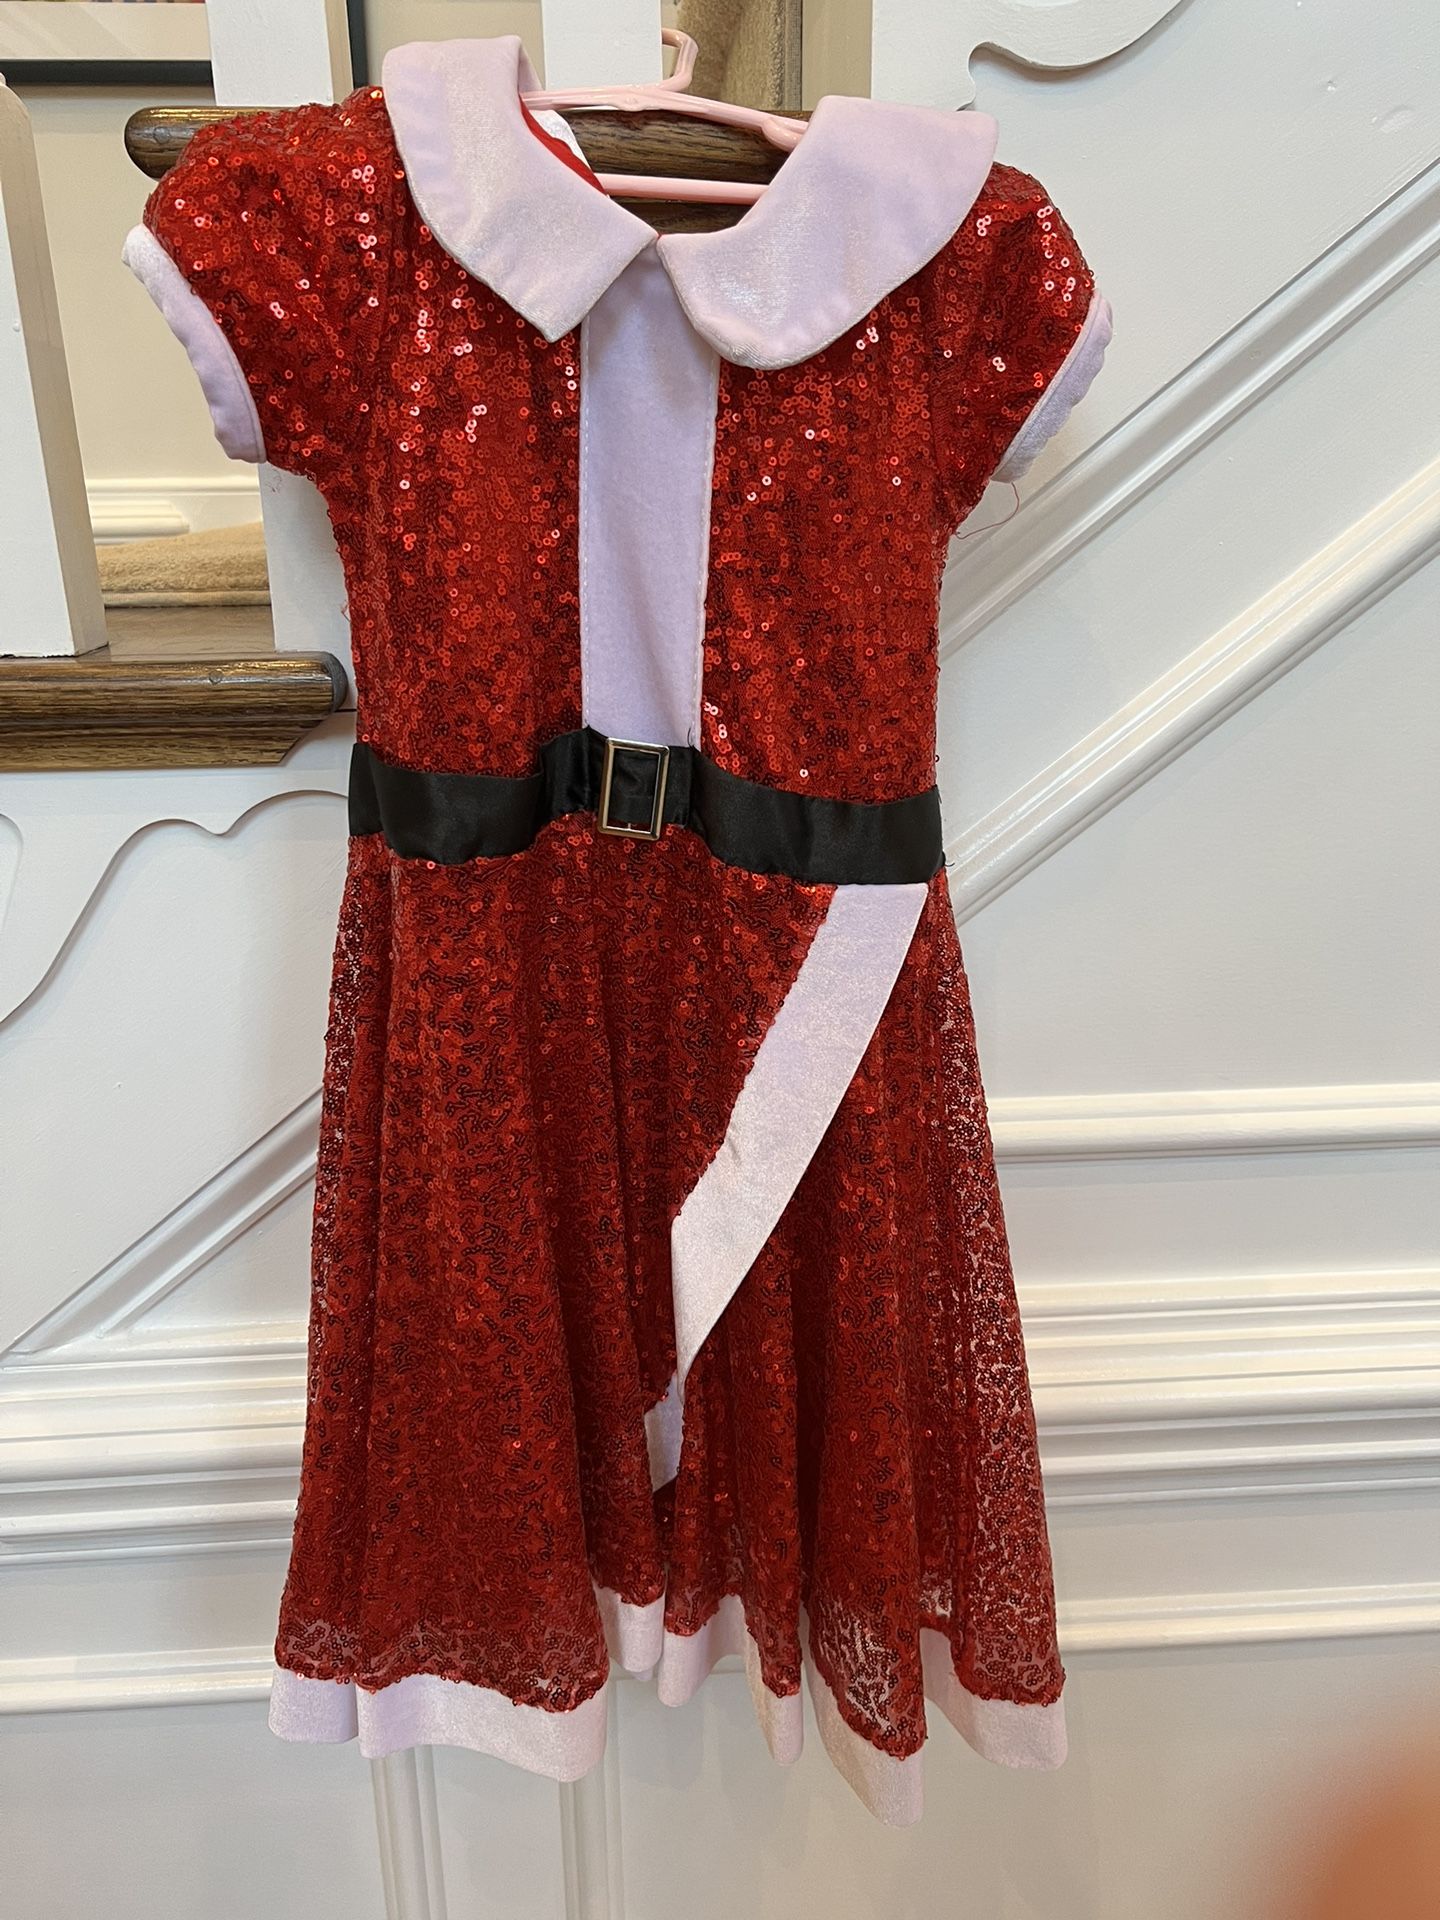 Girls Holiday Dress Size 6 - Red Sequin